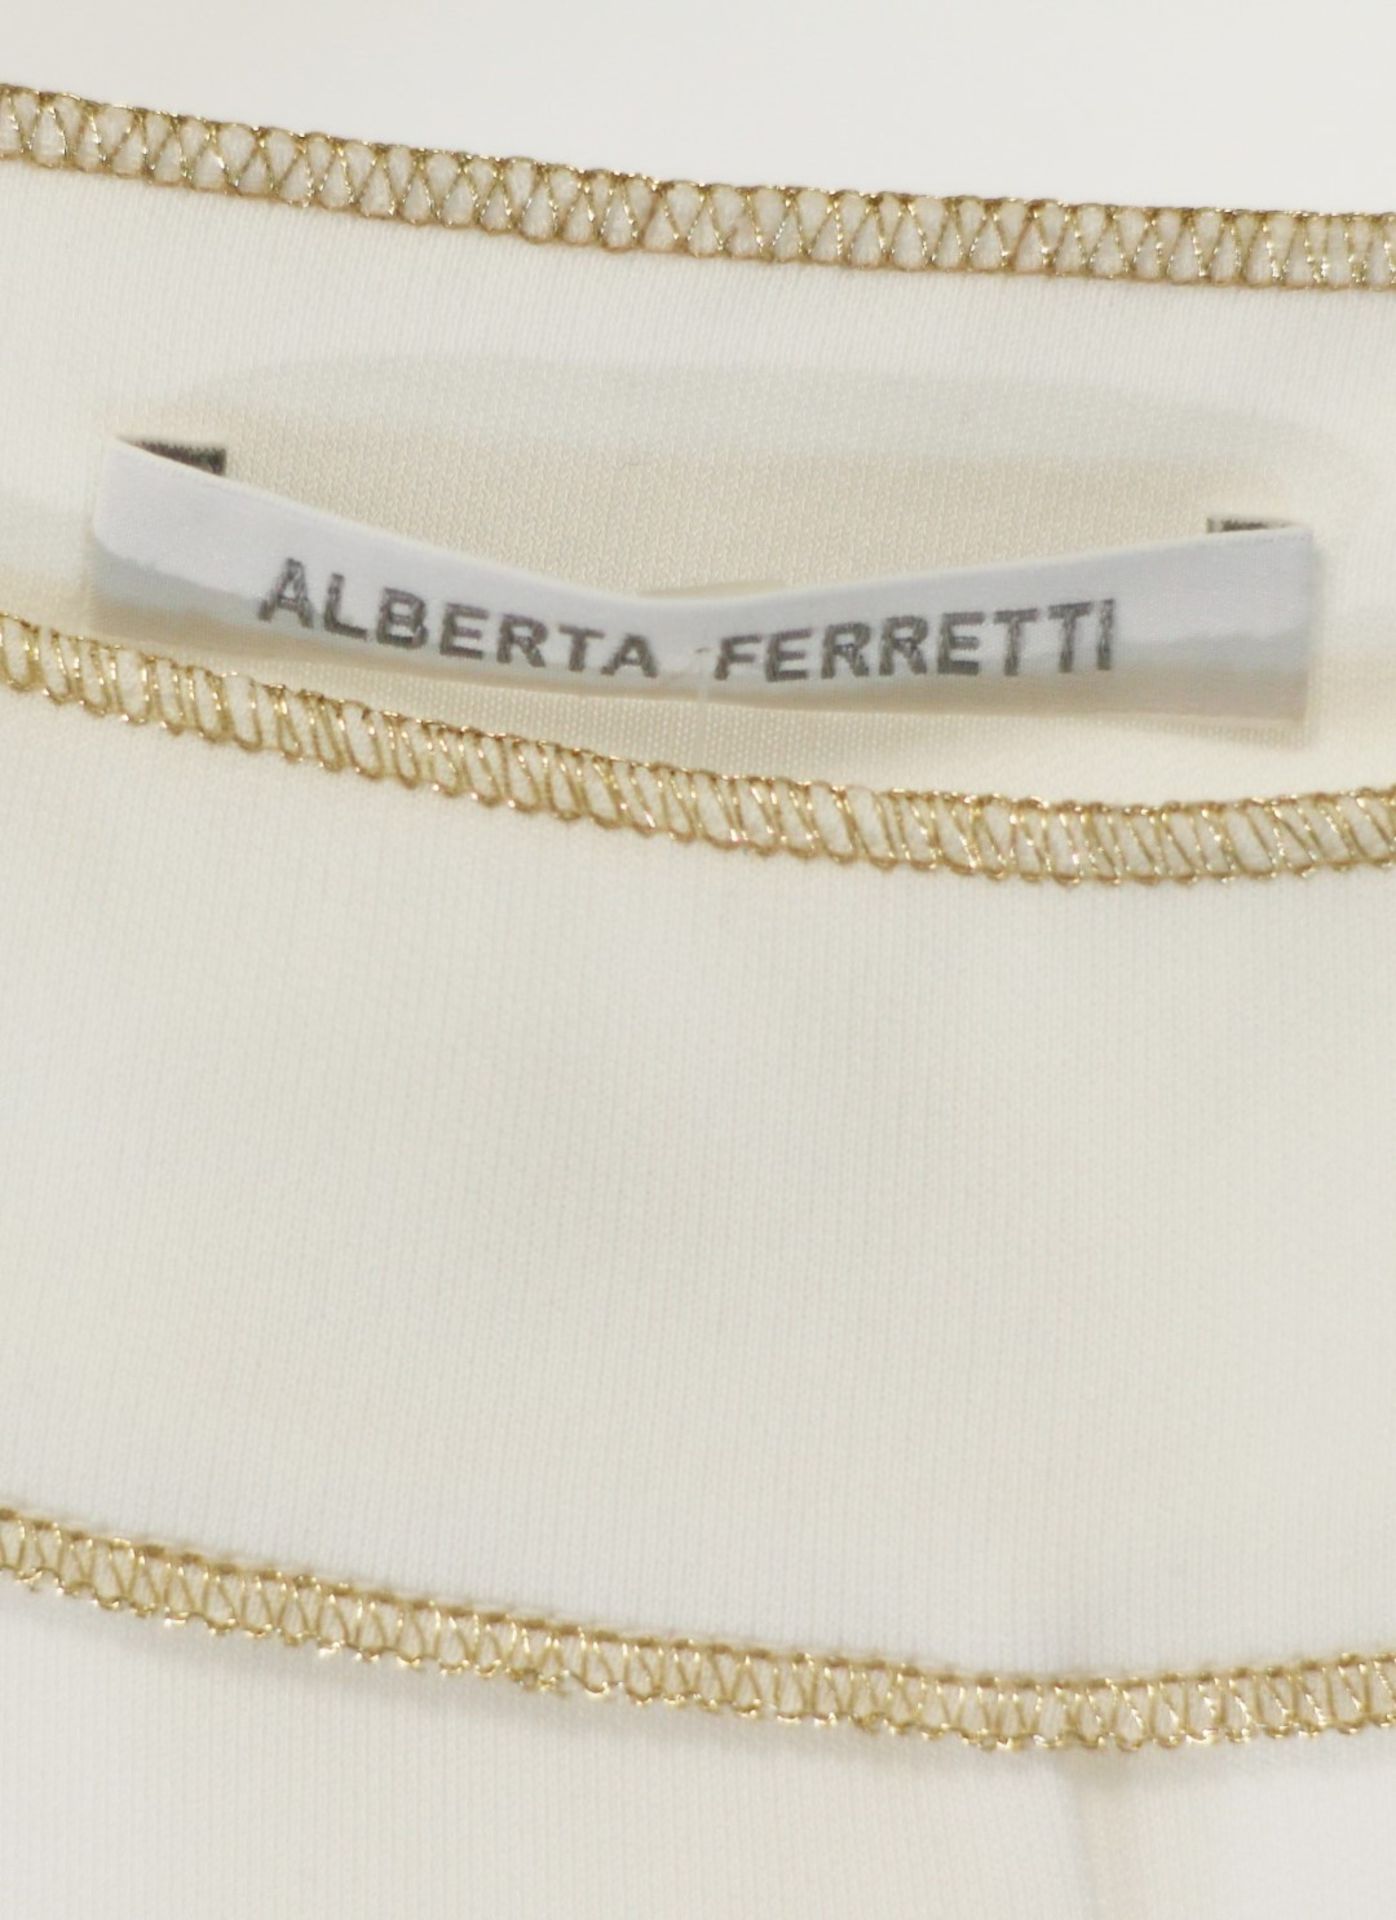 1 x Alberta Ferretti White Trousers - Size: 16 - Material: 100% Rayon - From a High End Clothing - Image 2 of 6